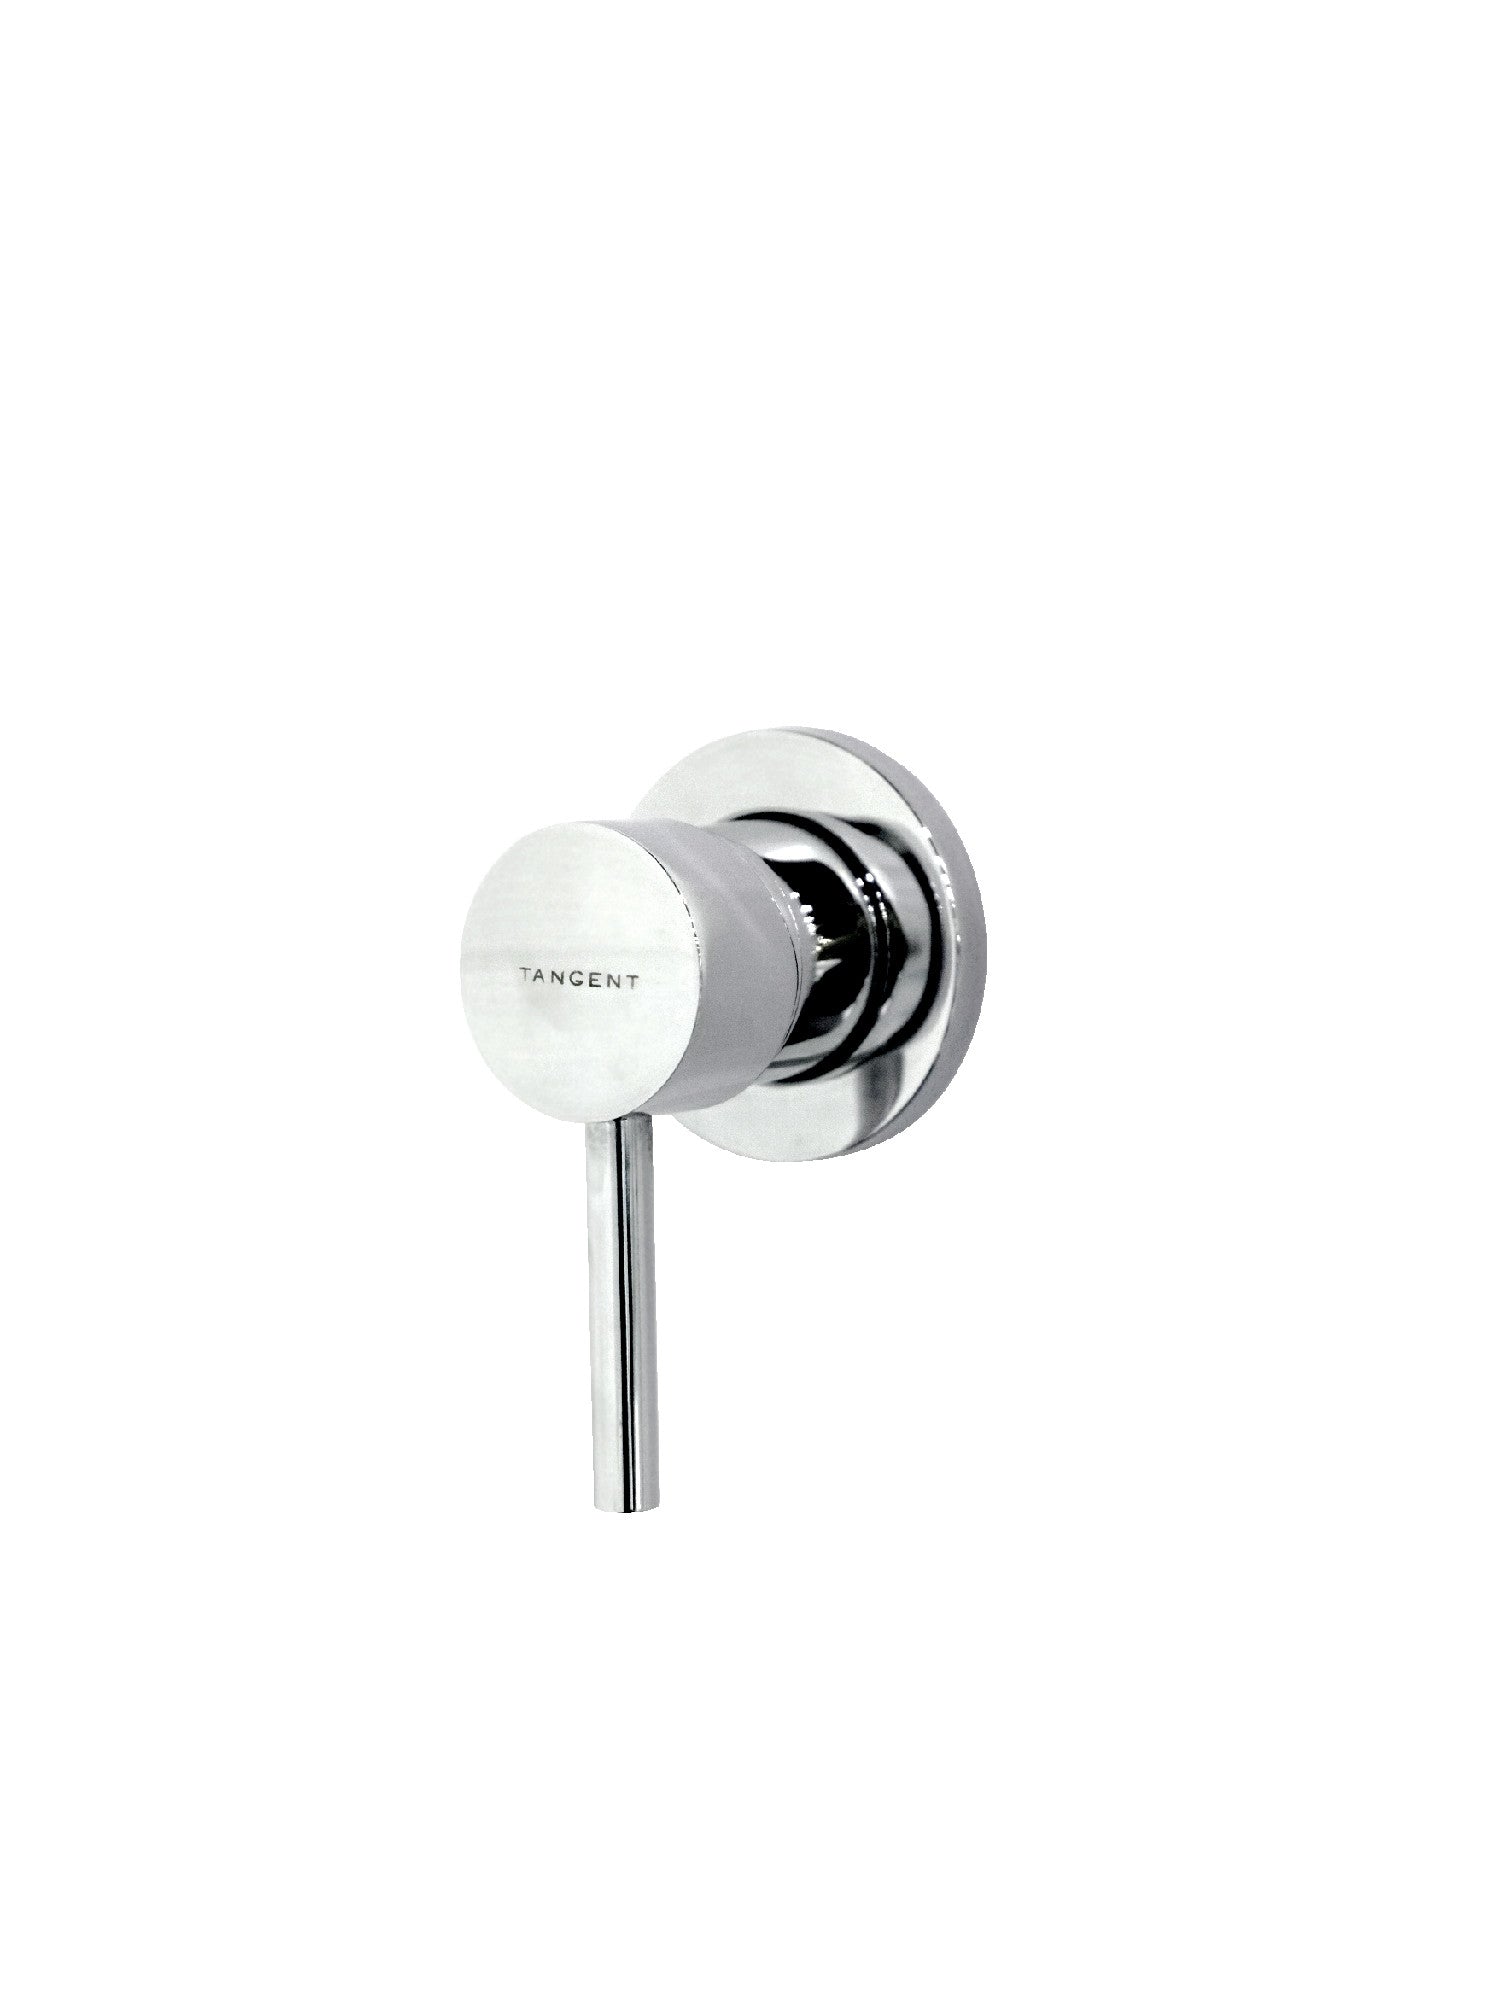 Tangent Concealed Shower Mixer #P100-11